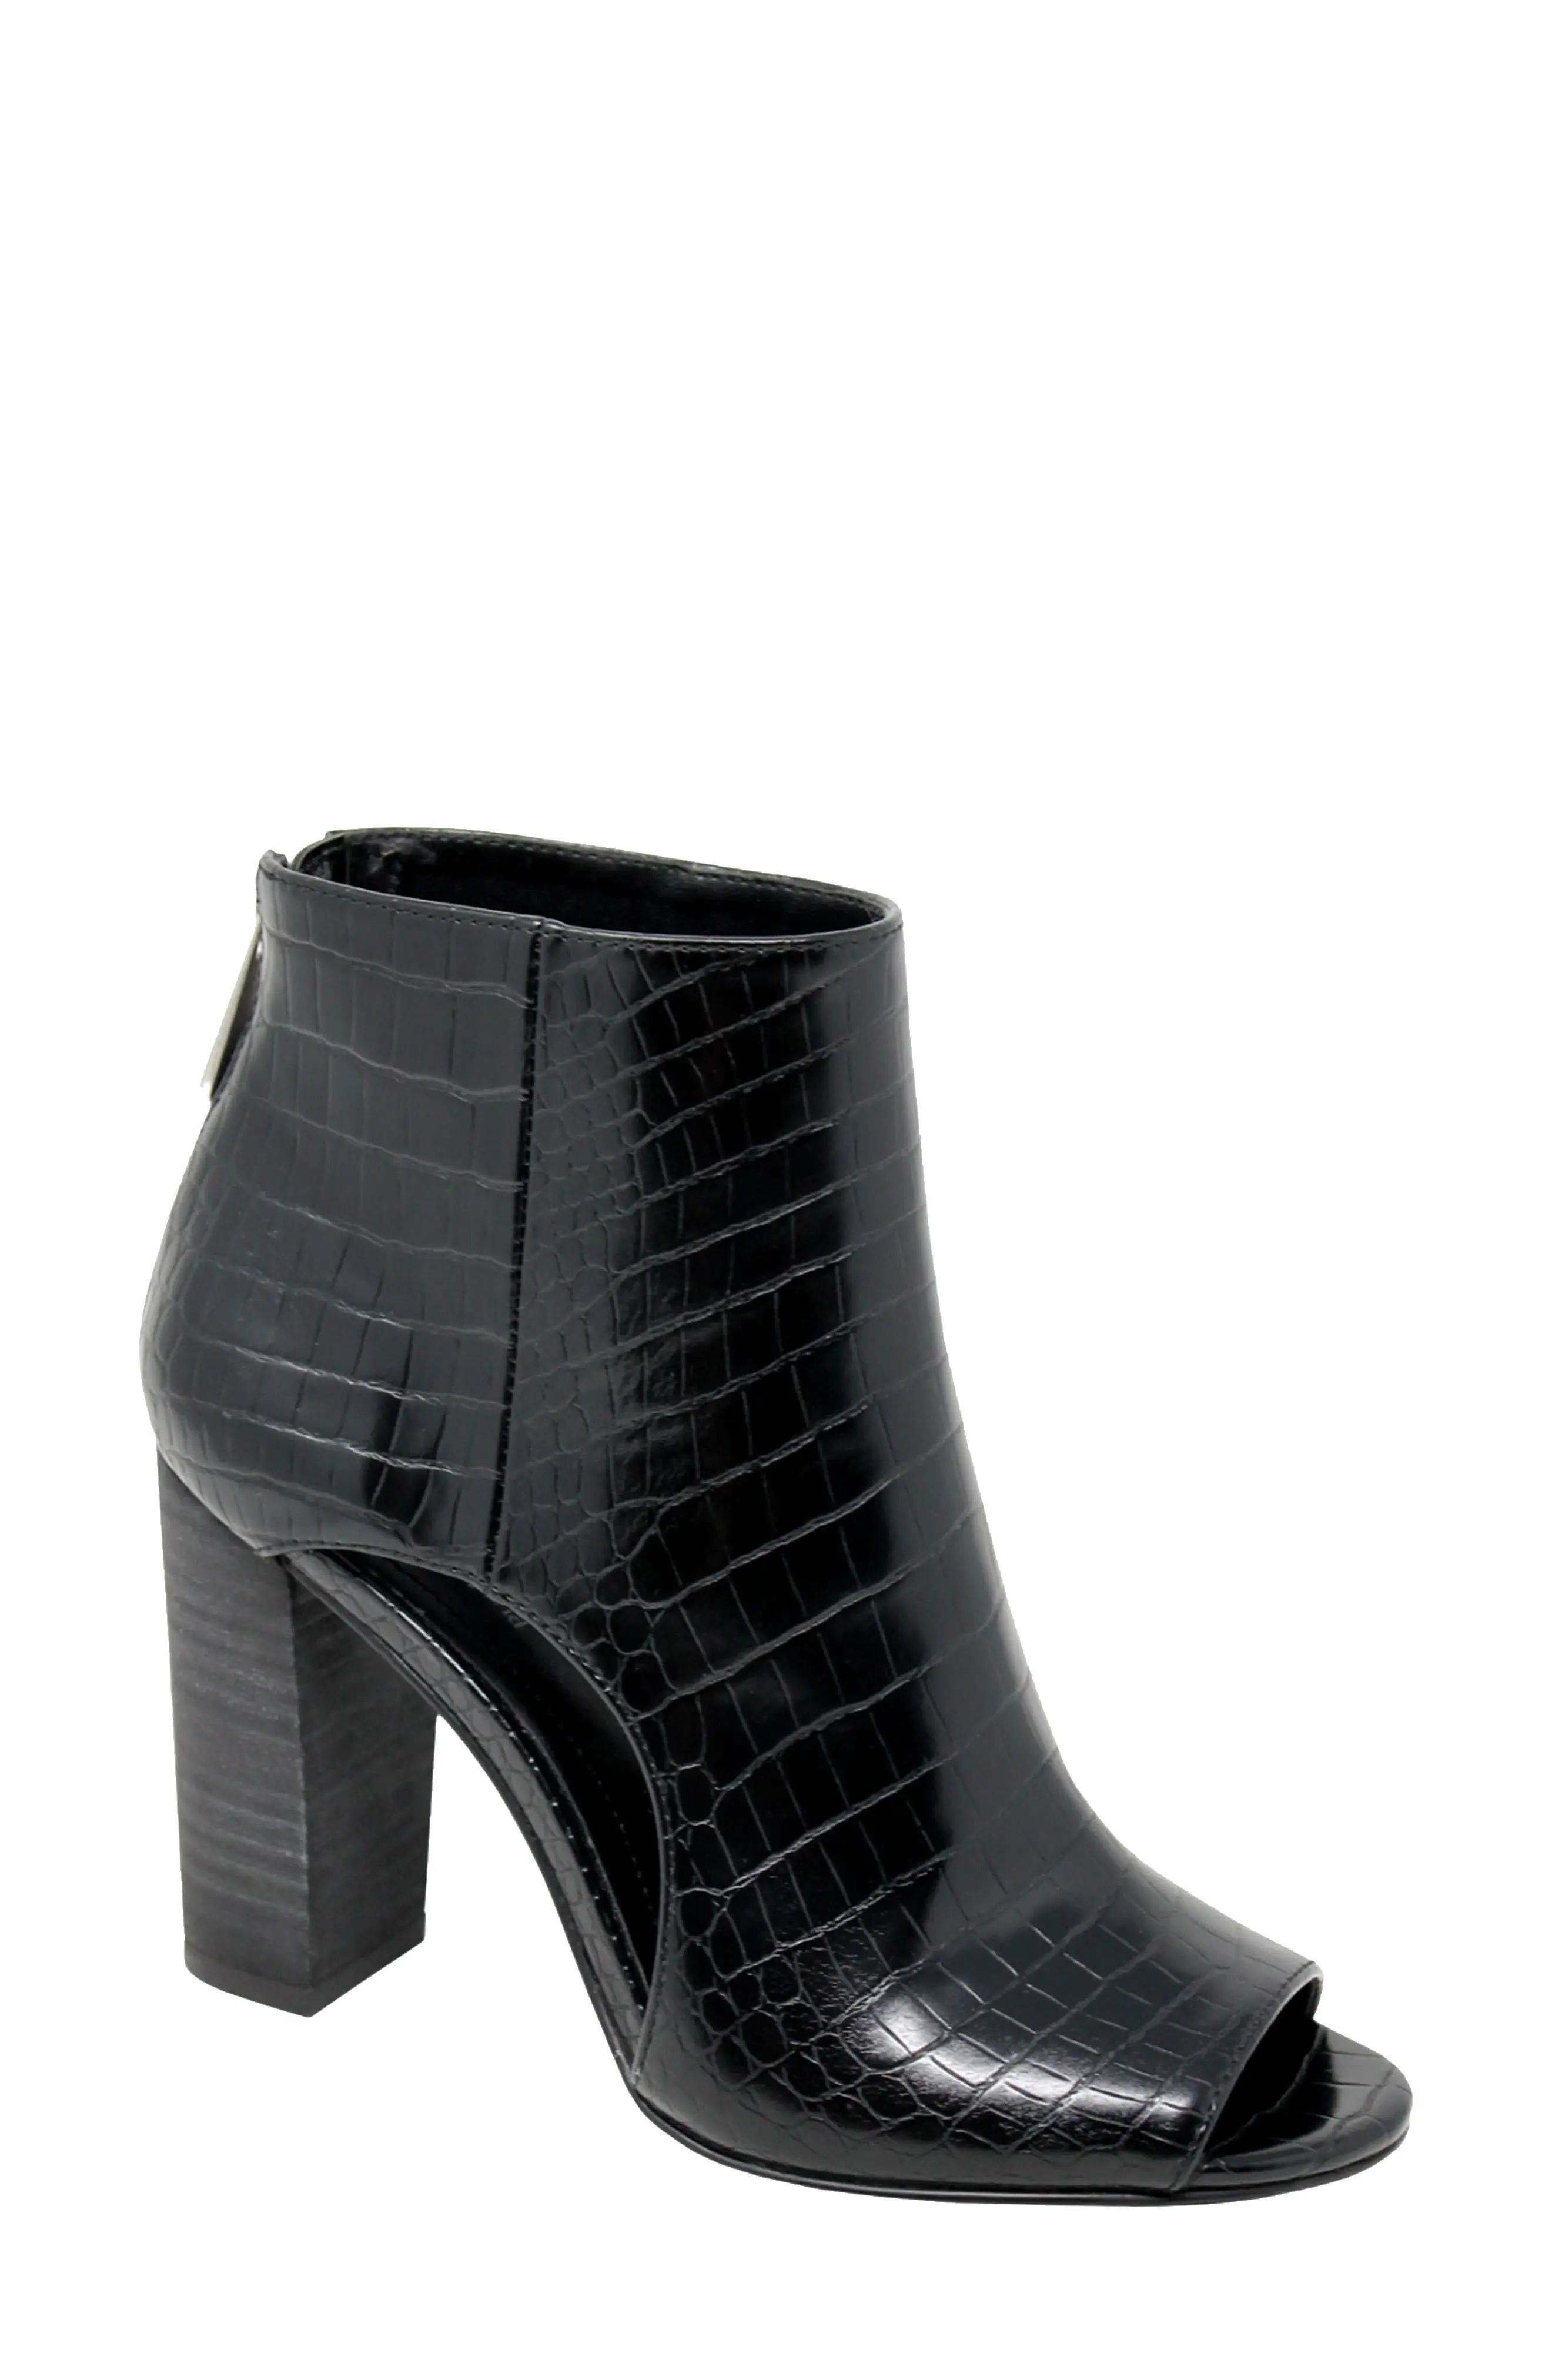 Women's Charles By Charles David Fable Cutout Open Toe Bootie, Size 7.5 M - Black | Nordstrom